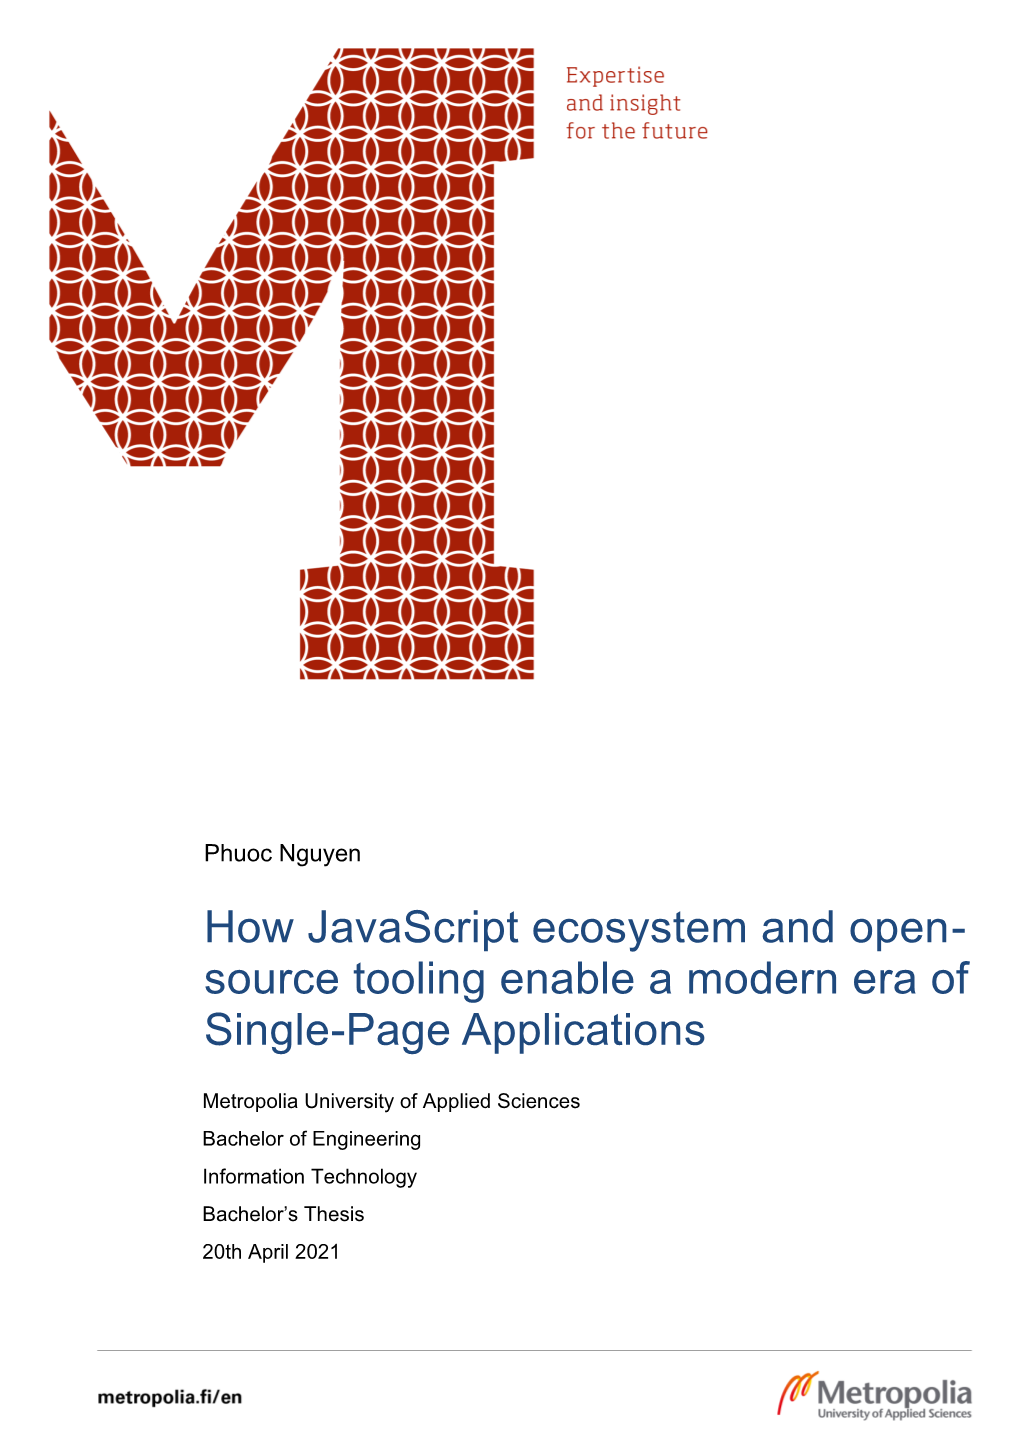 How Javascript Ecosystem and Open- Source Tooling Enable a Modern Era of Single-Page Applications